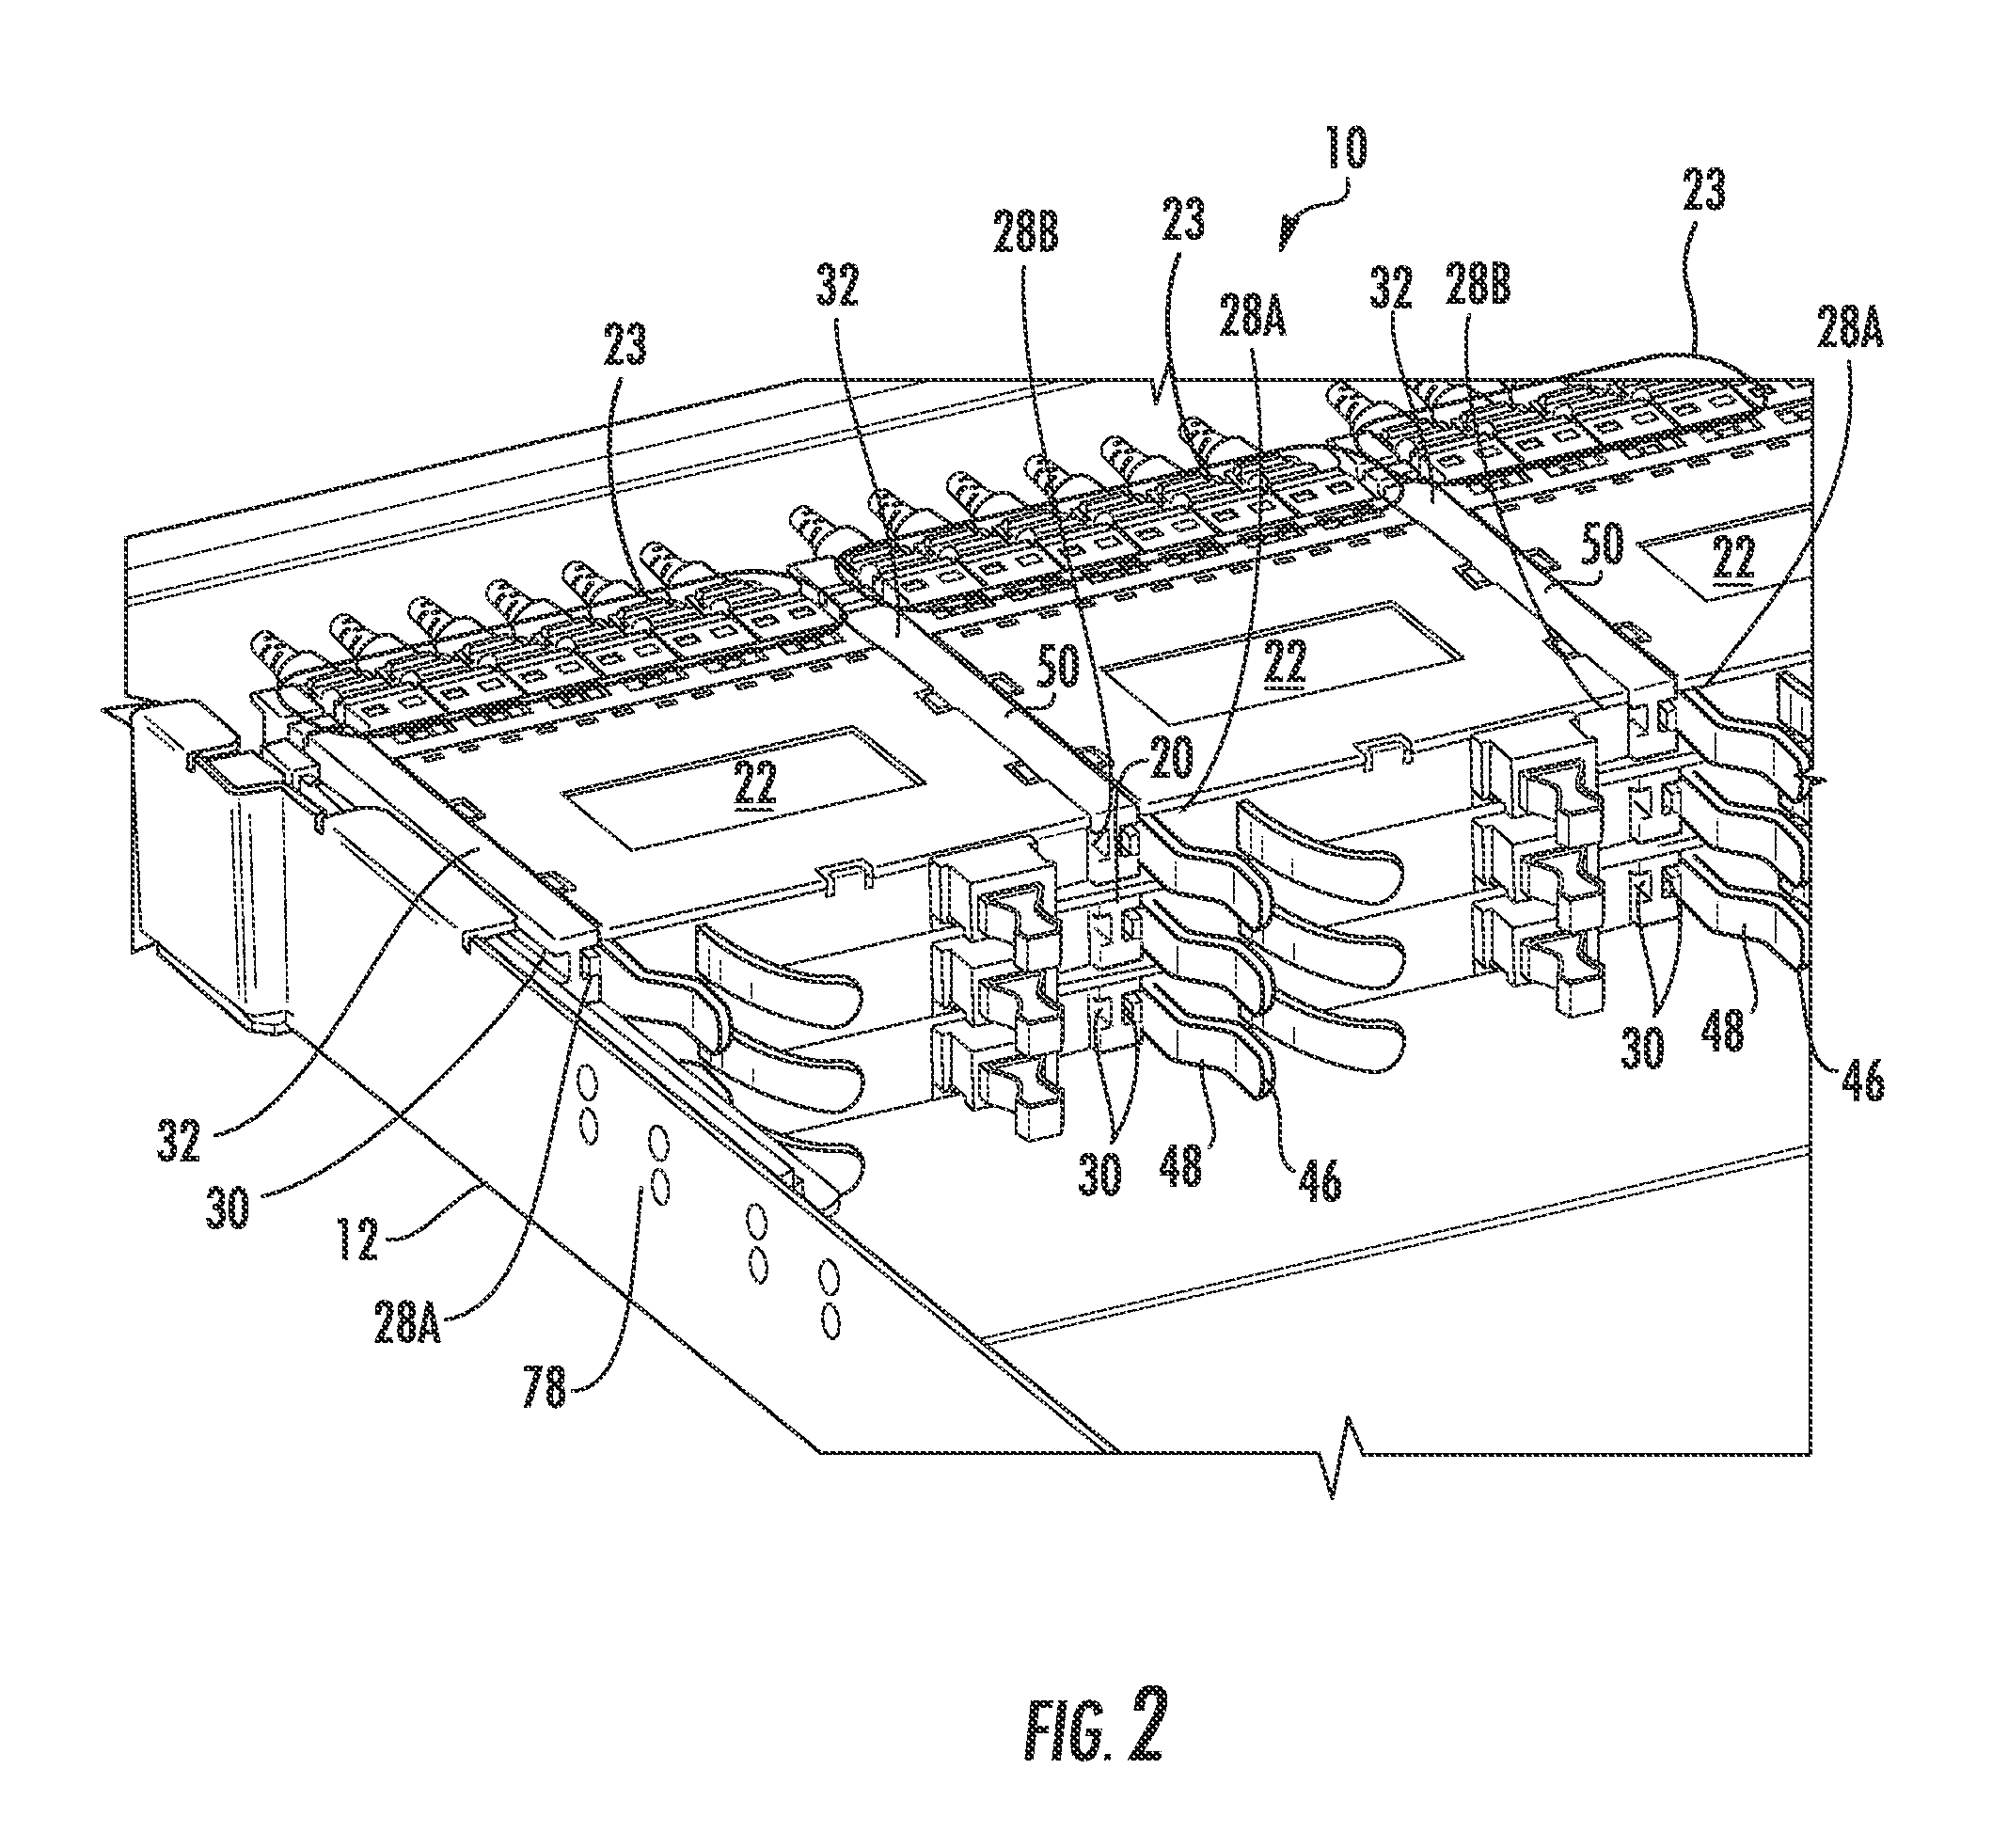 High Capacity Fiber Optic Connection Infrastructure Apparatus